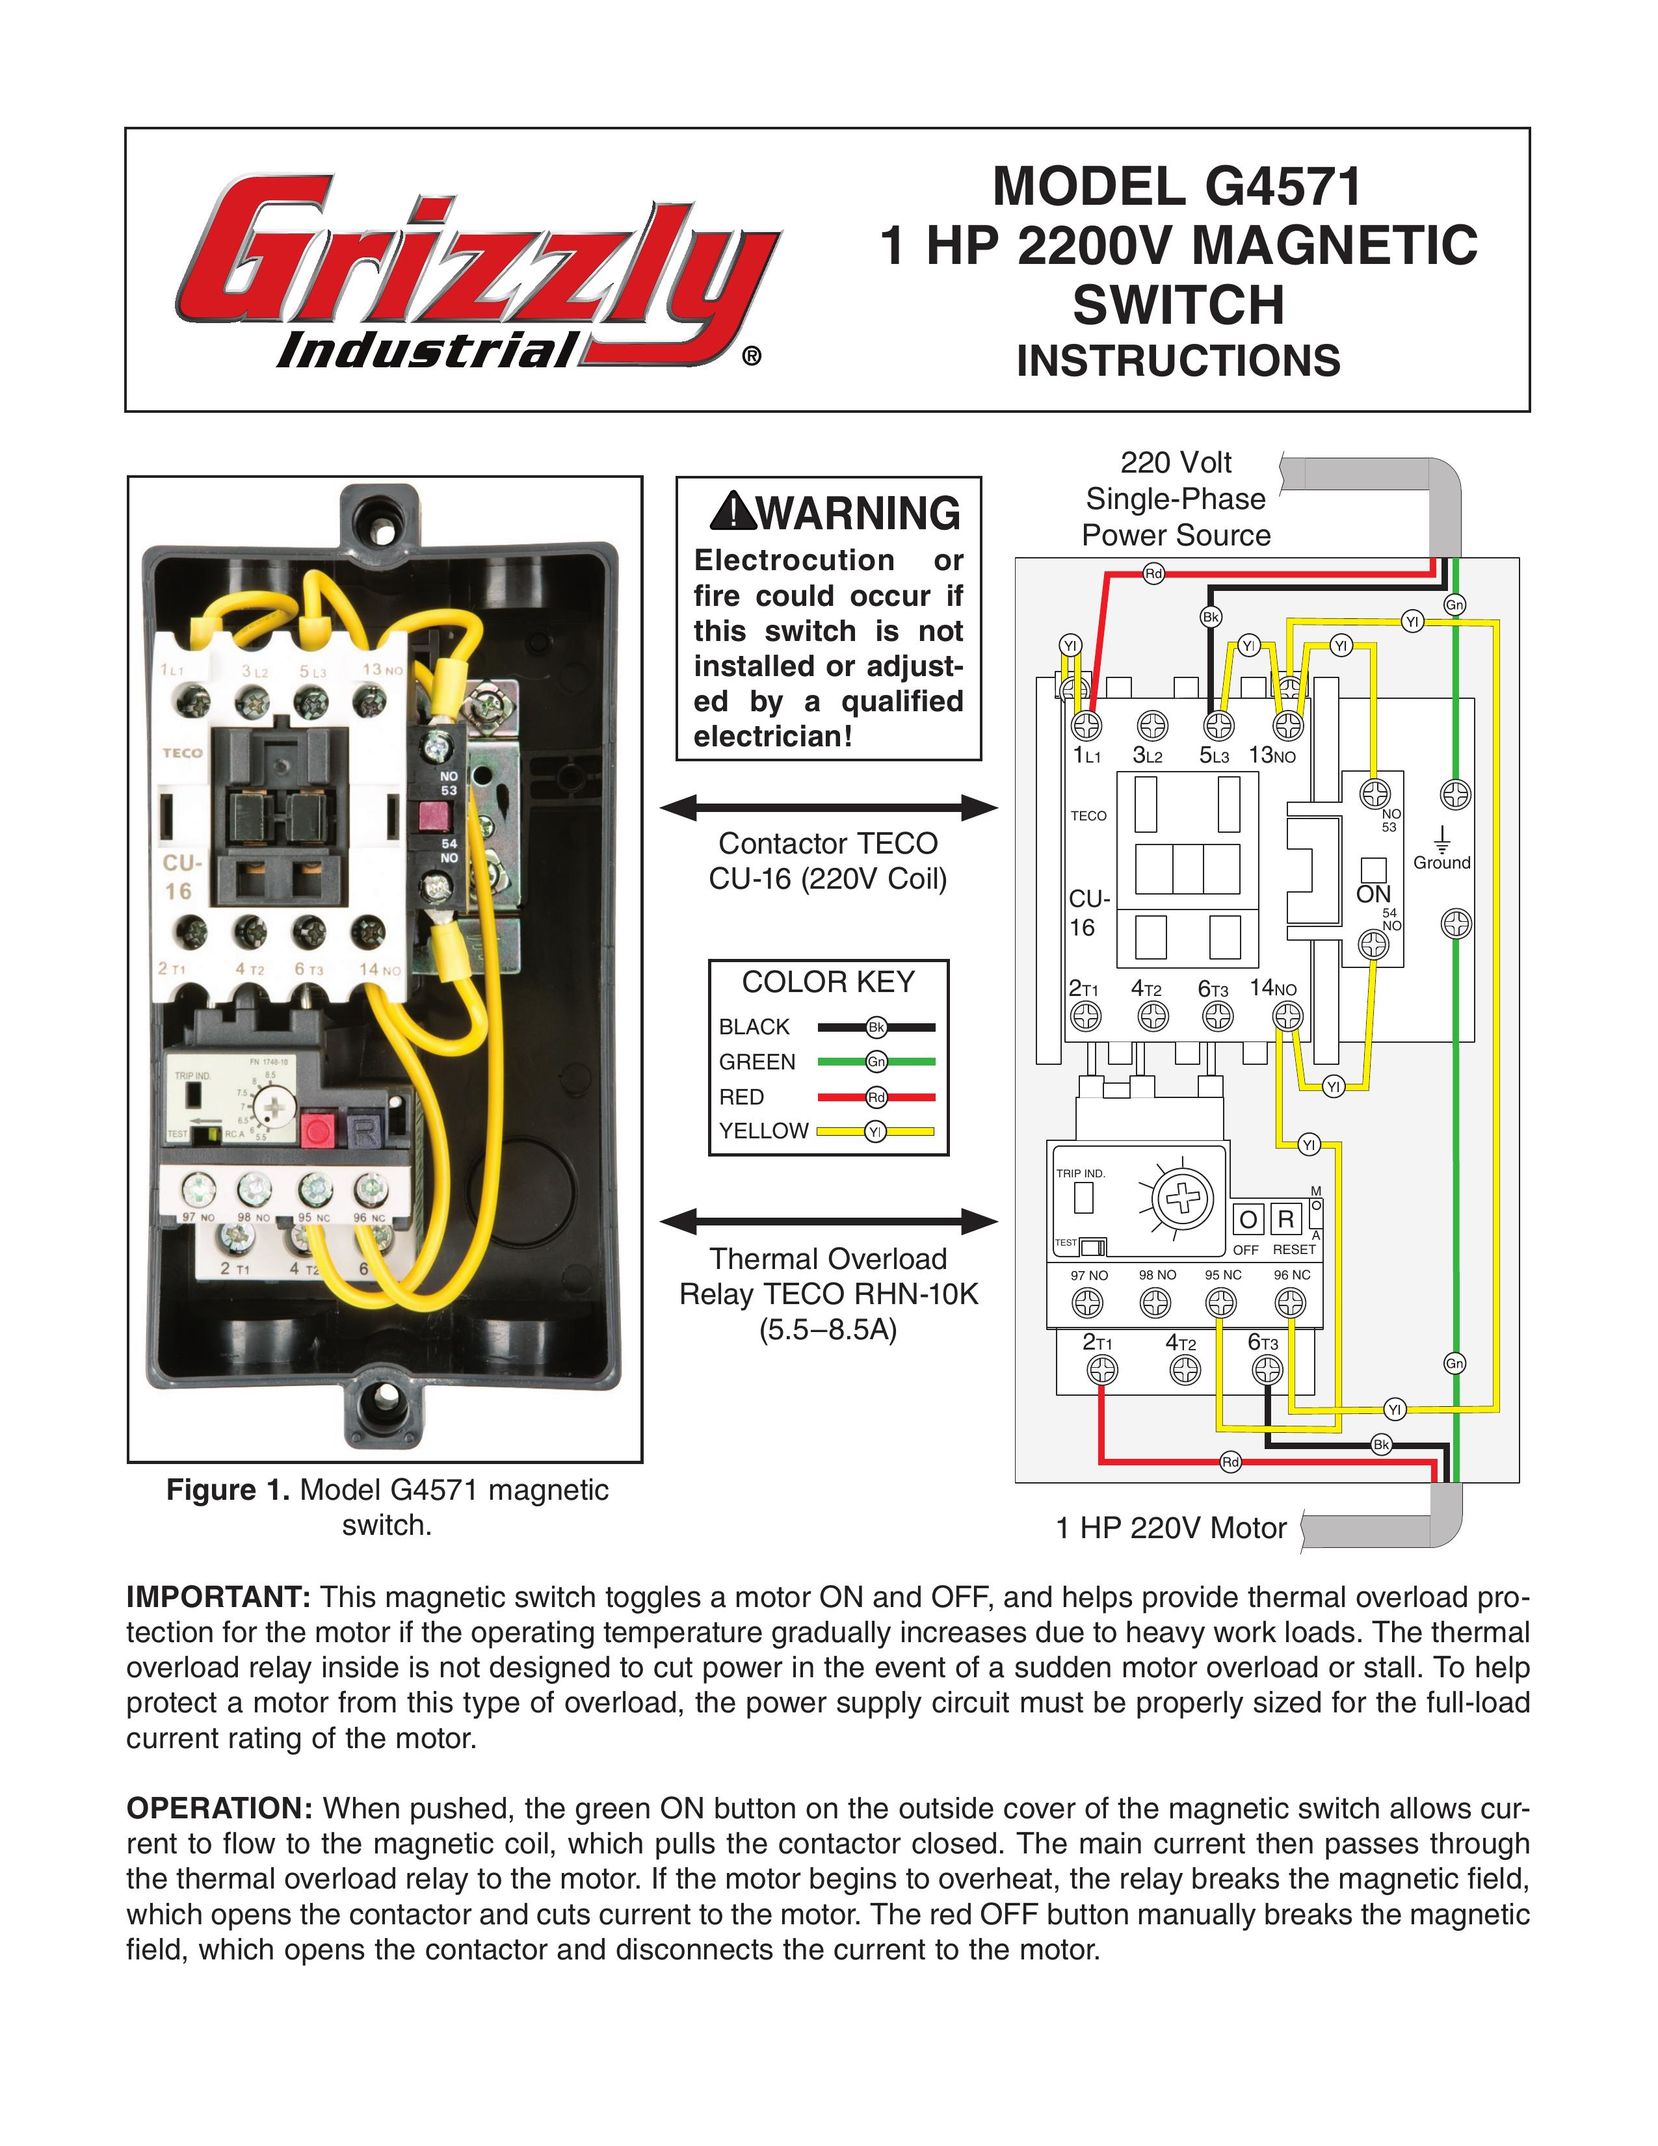 Grizzly G4571 Switch User Manual